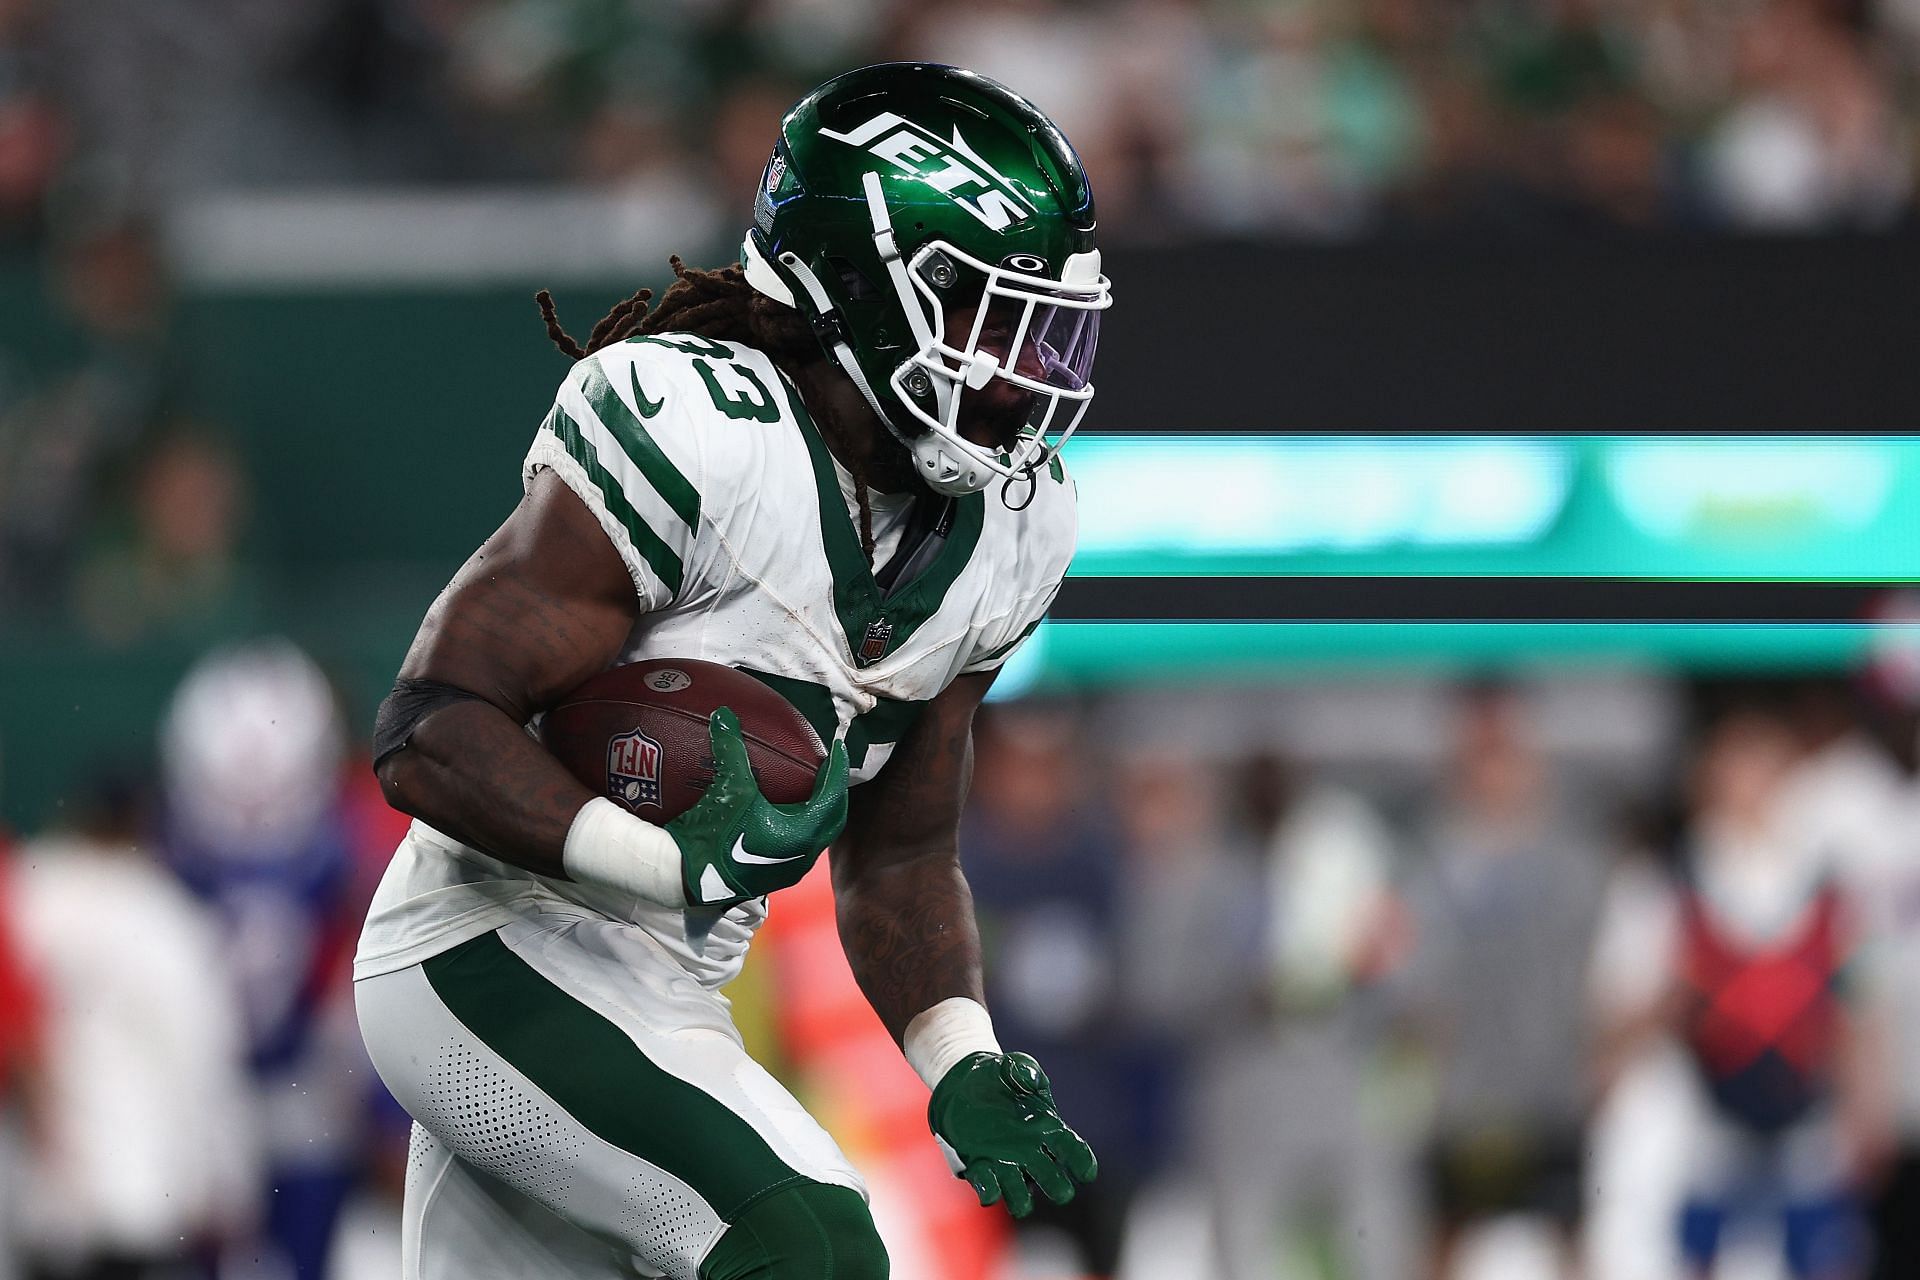 Dalvin Cook has had dismal stats with the New York Jets